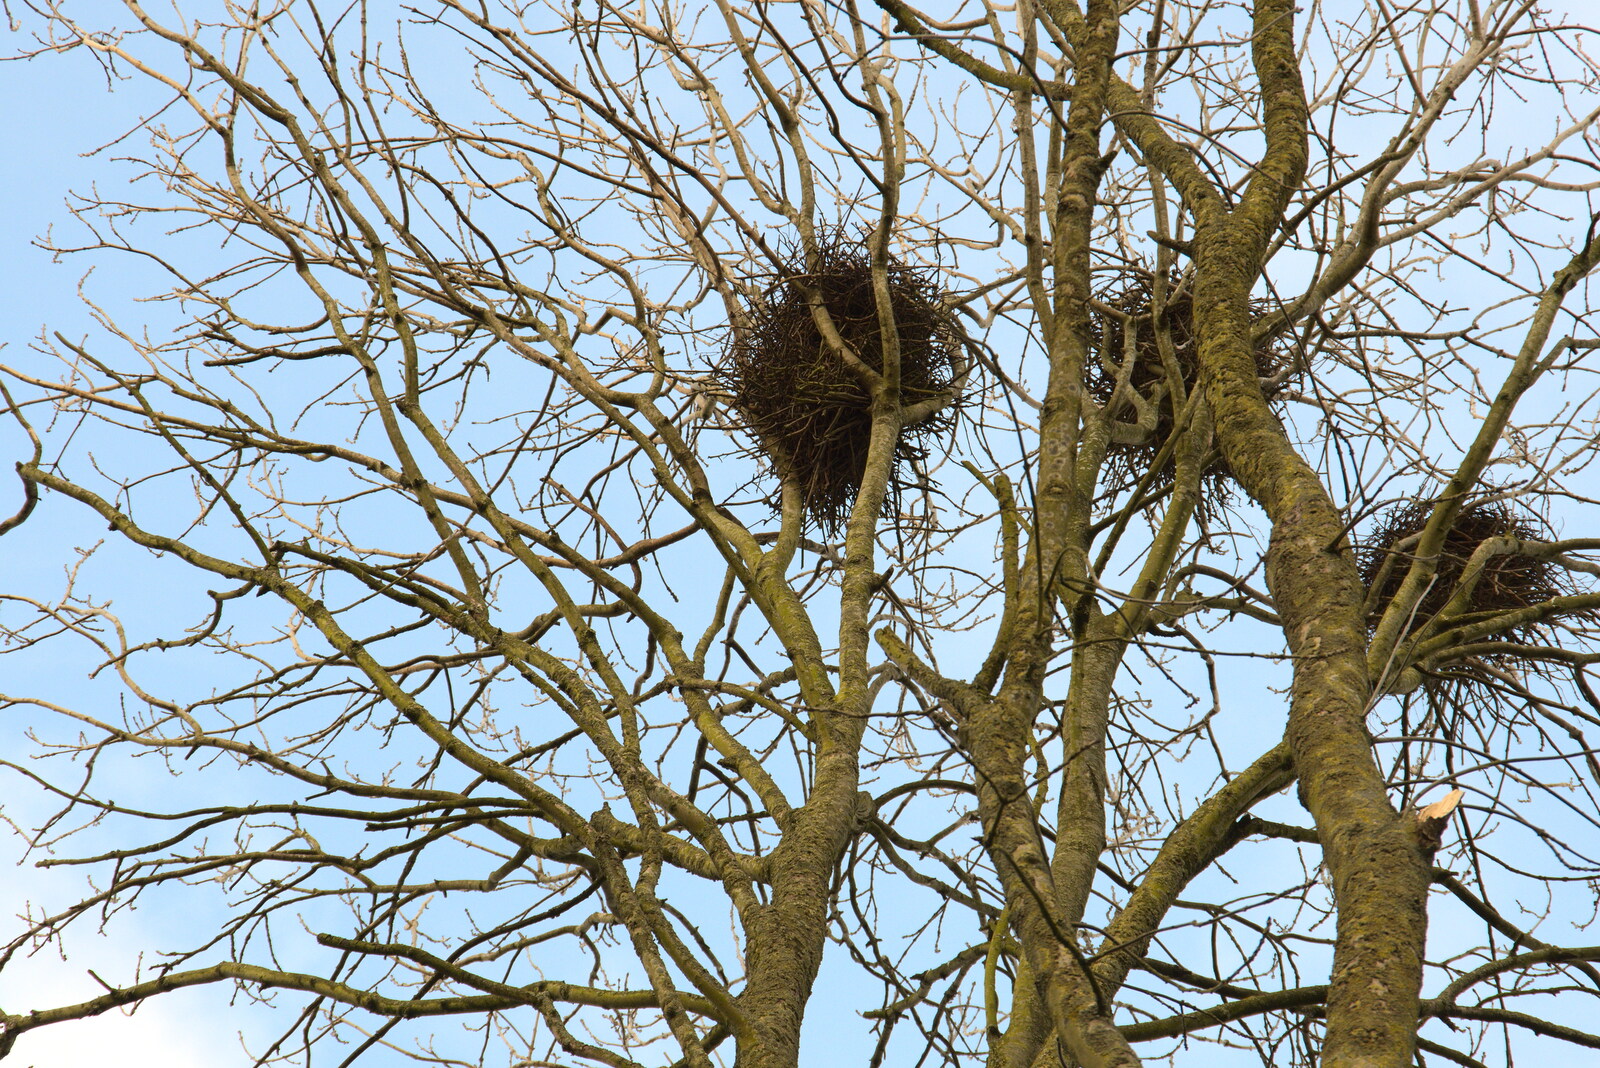 Crows' nests up a tree from The Oaksmere: 28 Weeks Later, Brome, Suffolk - 21st March 2021